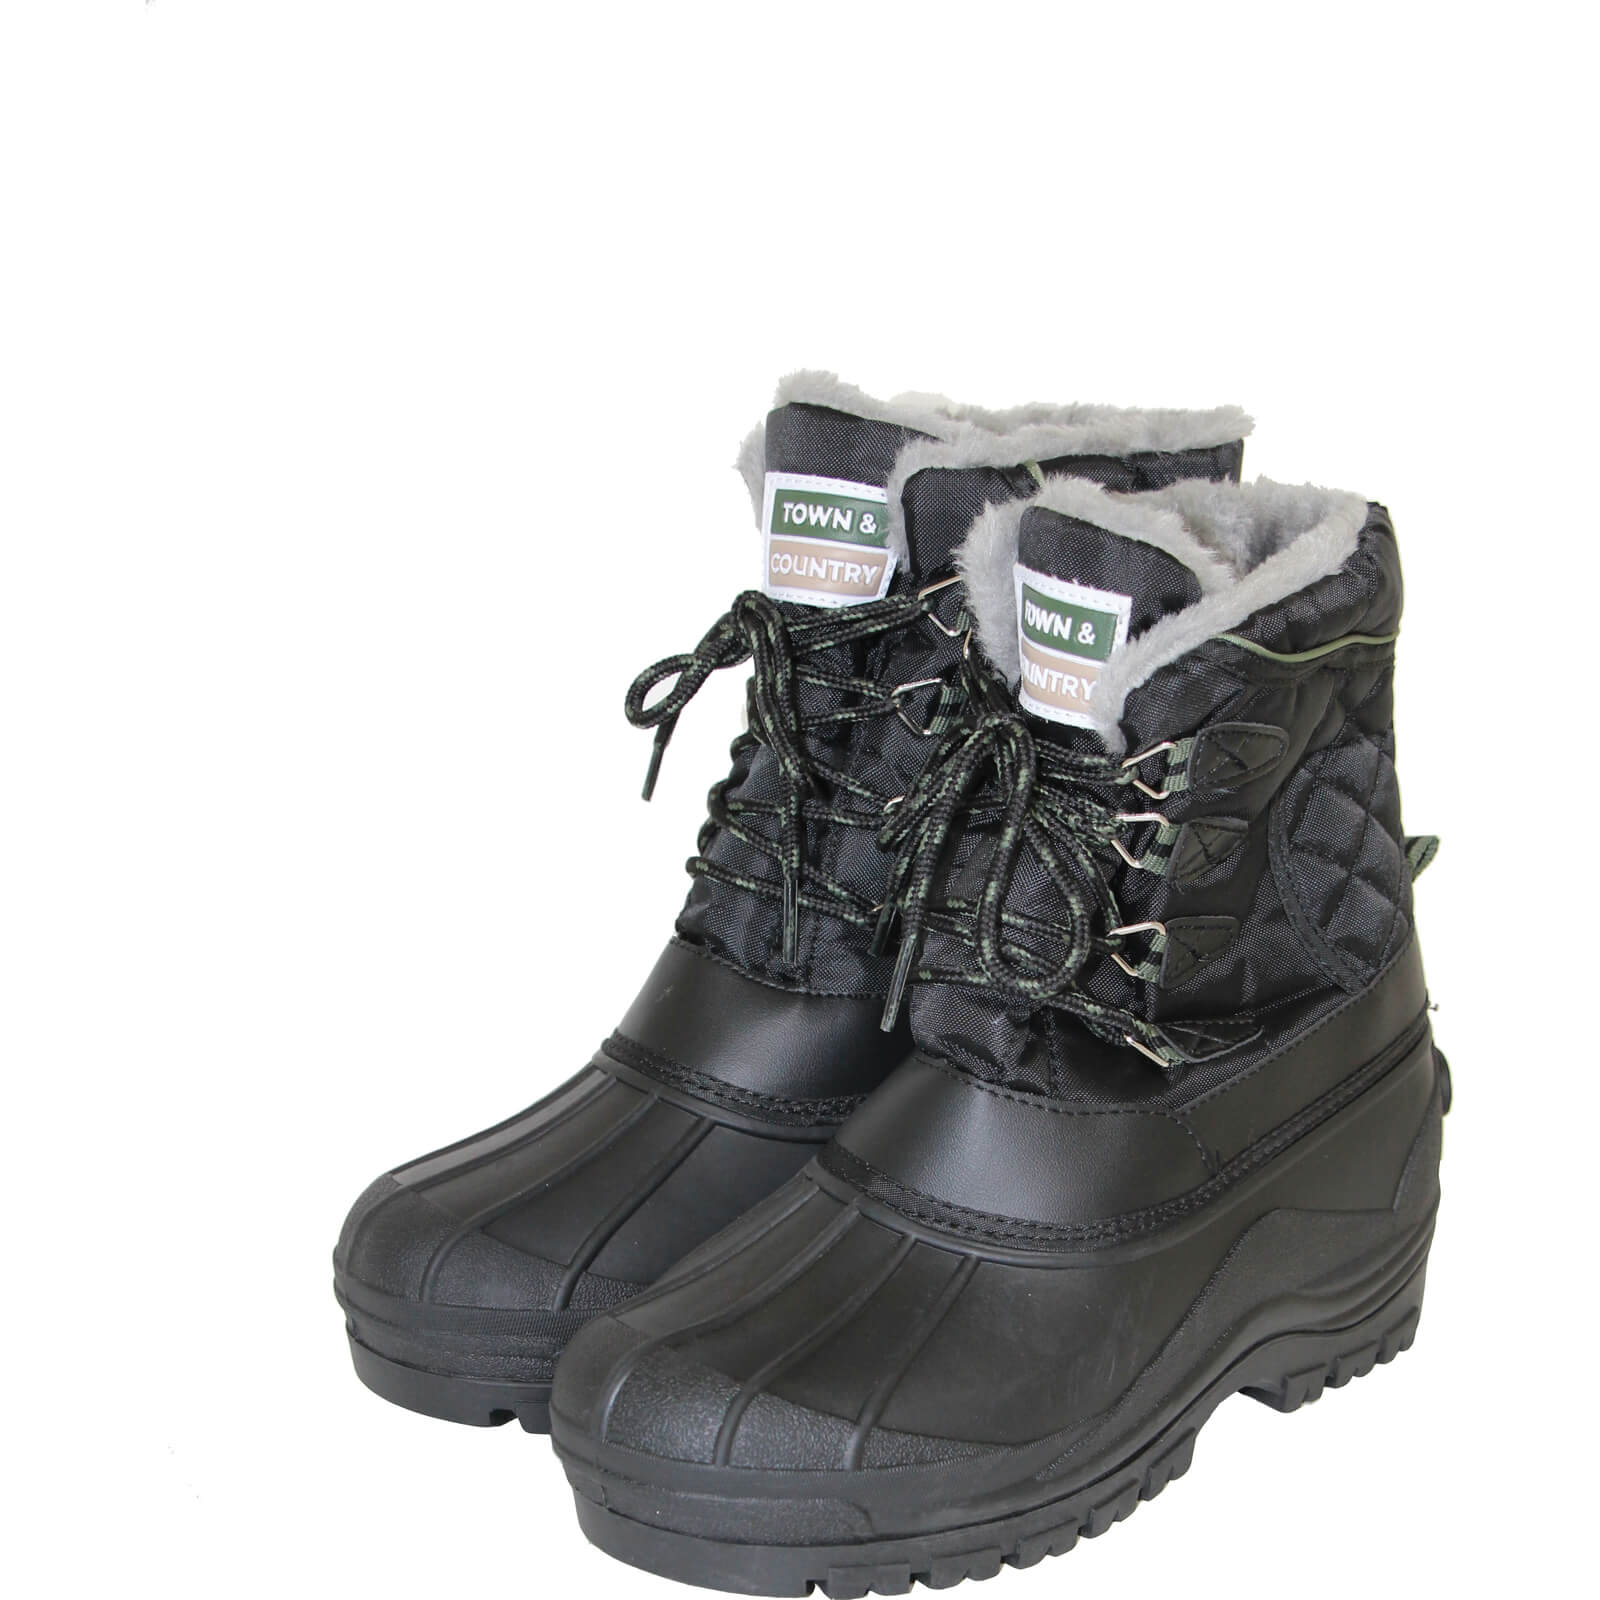 Image of Town and Country Curbridge Waterproof Lined Winter Boots Black Size 10